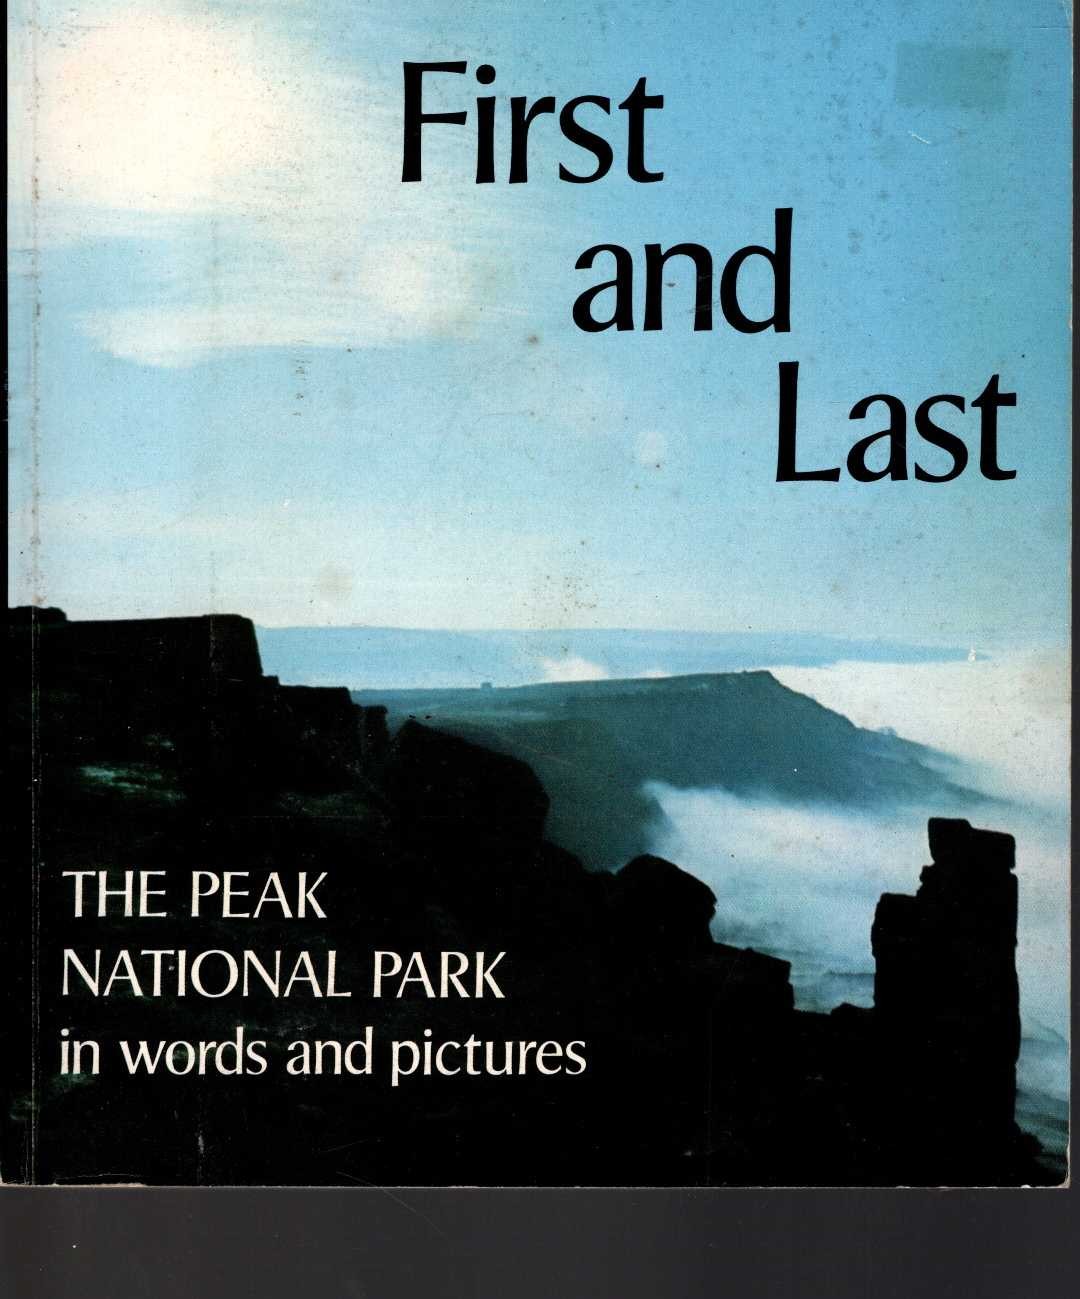 \ FIRST AND LAST. The Peak National Park in words and pictures by Ronald Smith front book cover image